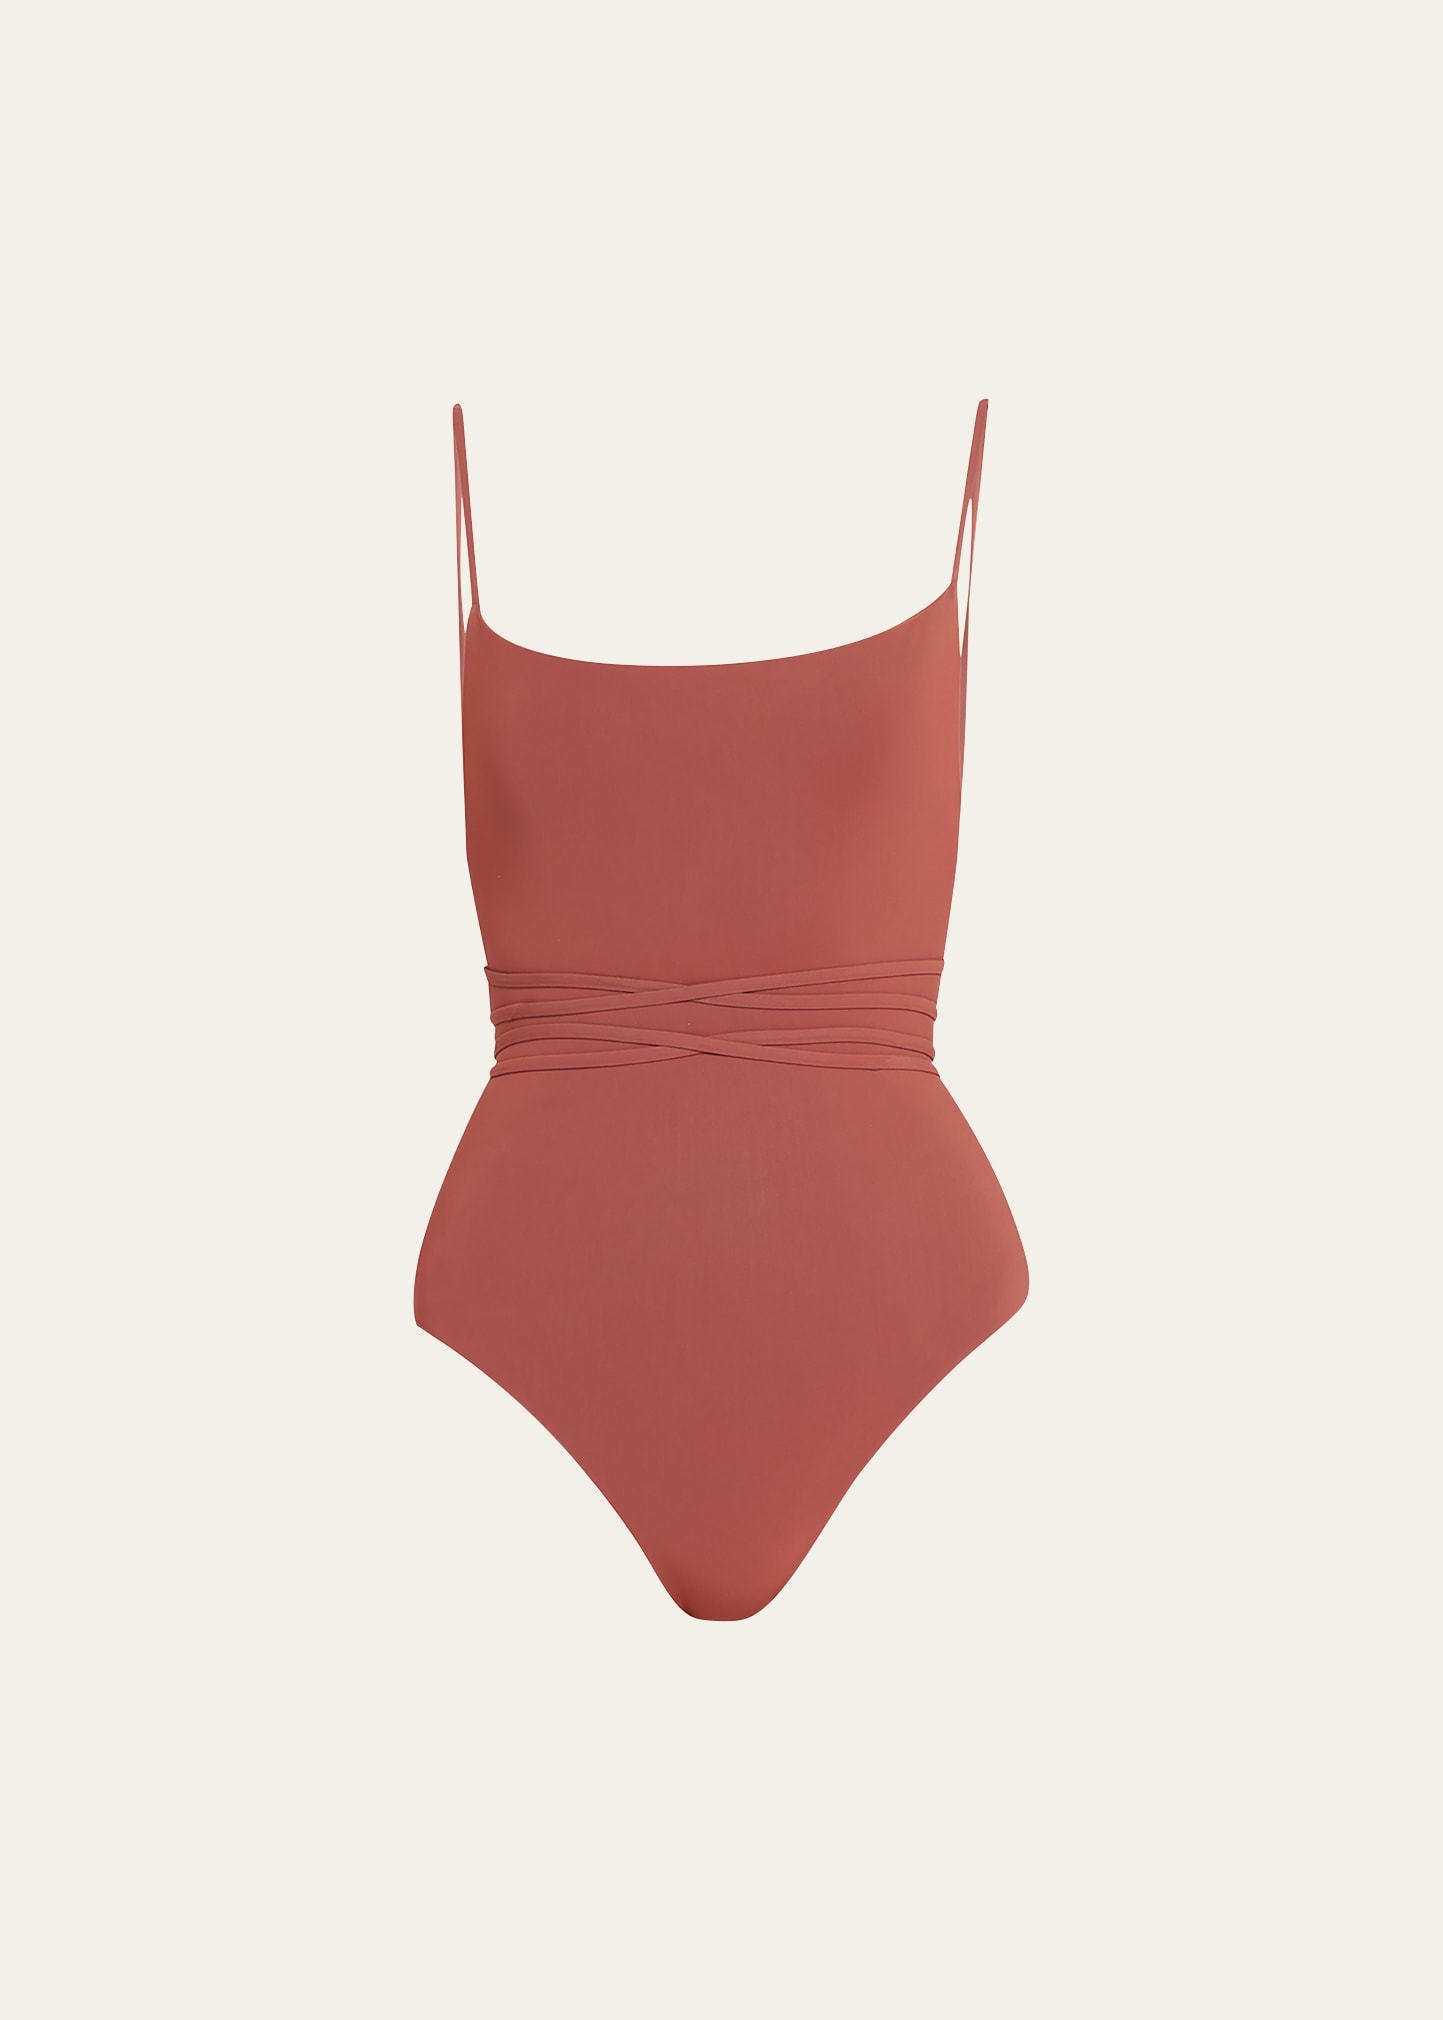 The K. M. Tie Cheeky One-Piece Swimsuit